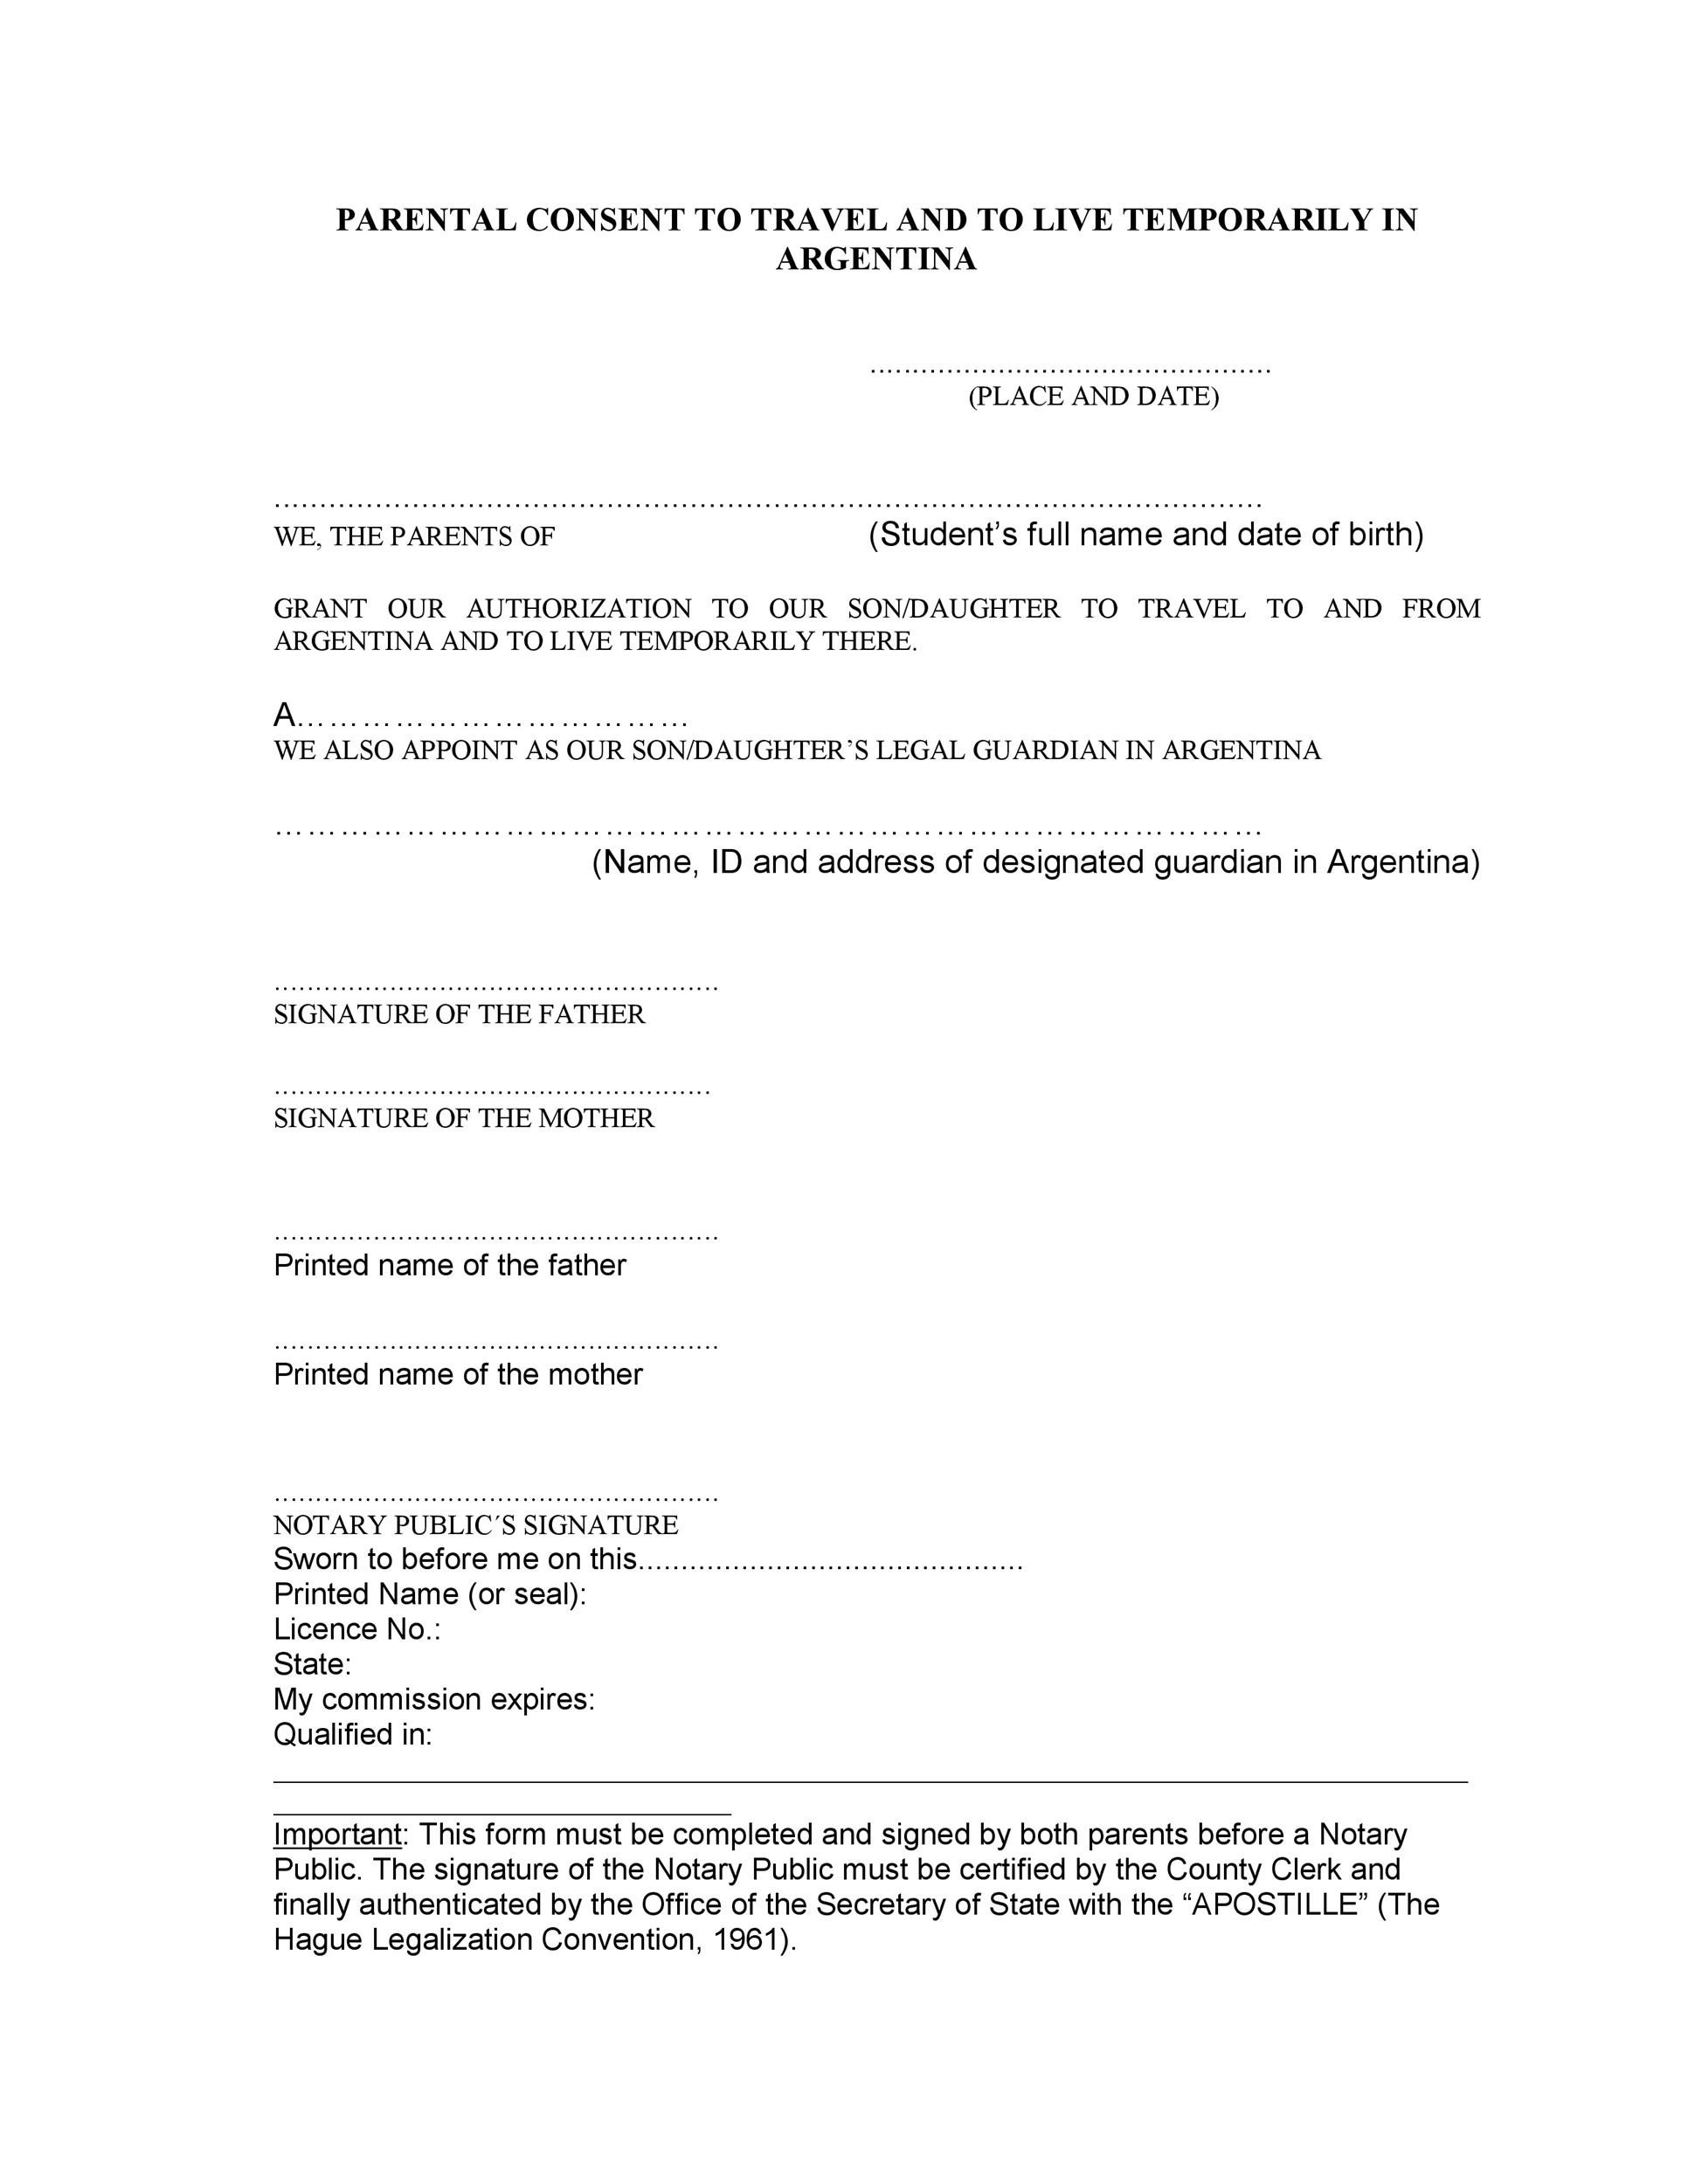 Free parental consent form template 17